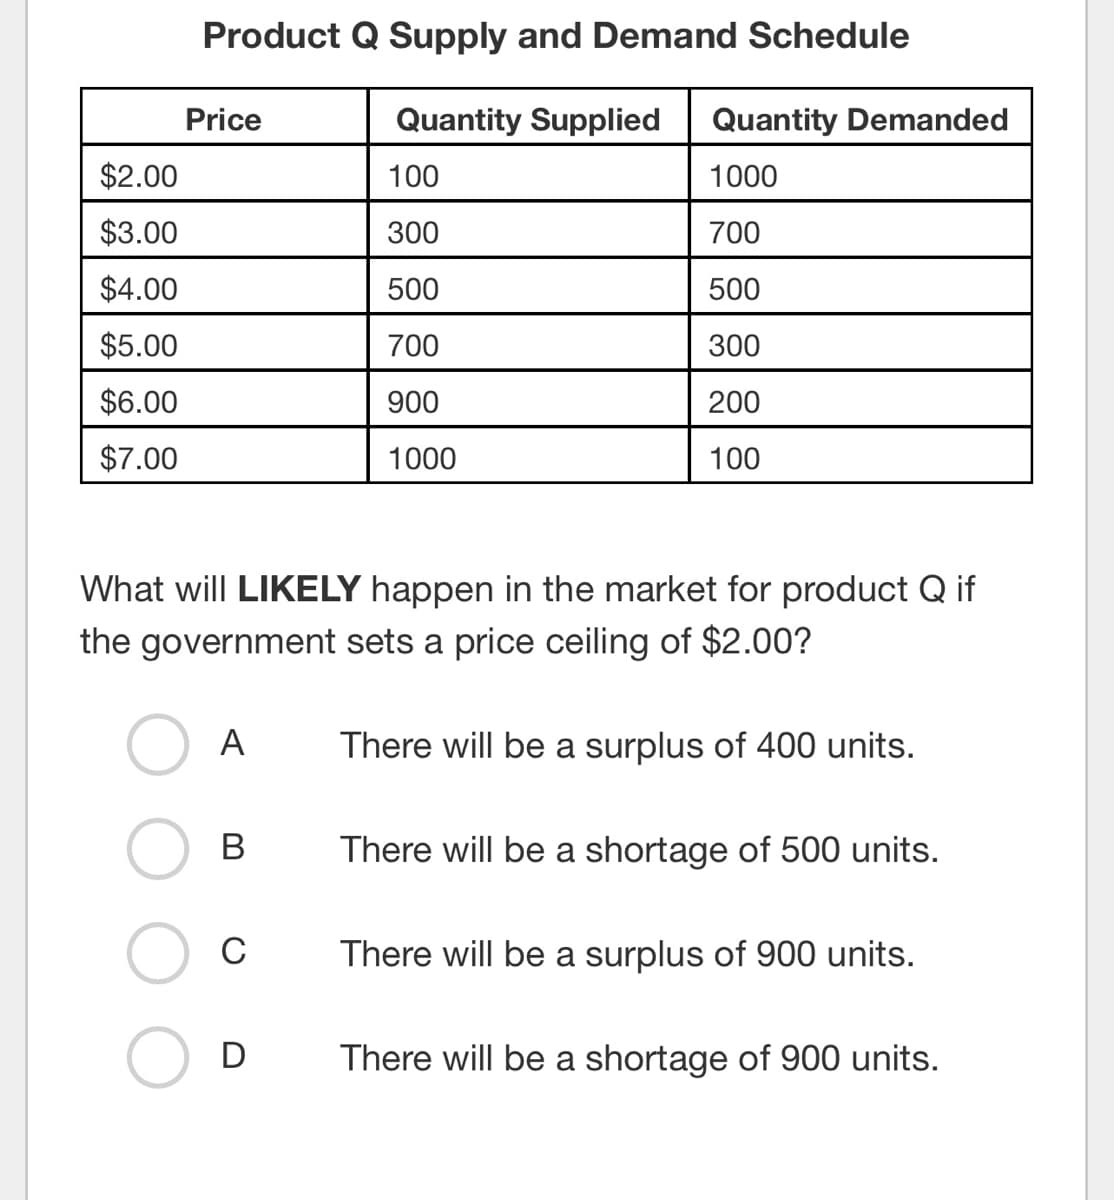 $2.00
$3.00
$4.00
$5.00
$6.00
$7.00
Product Q Supply and Demand Schedule
Price
A
What will LIKELY happen in the market for product Q if
the government sets a price ceiling of $2.00?
B
C
Quantity Supplied Quantity Demanded
1000
700
500
300
200
100
D
100
300
500
700
900
1000
There will be a surplus of 400 units.
There will be a shortage of 500 units.
There will be a surplus of 900 units.
There will be a shortage of 900 units.